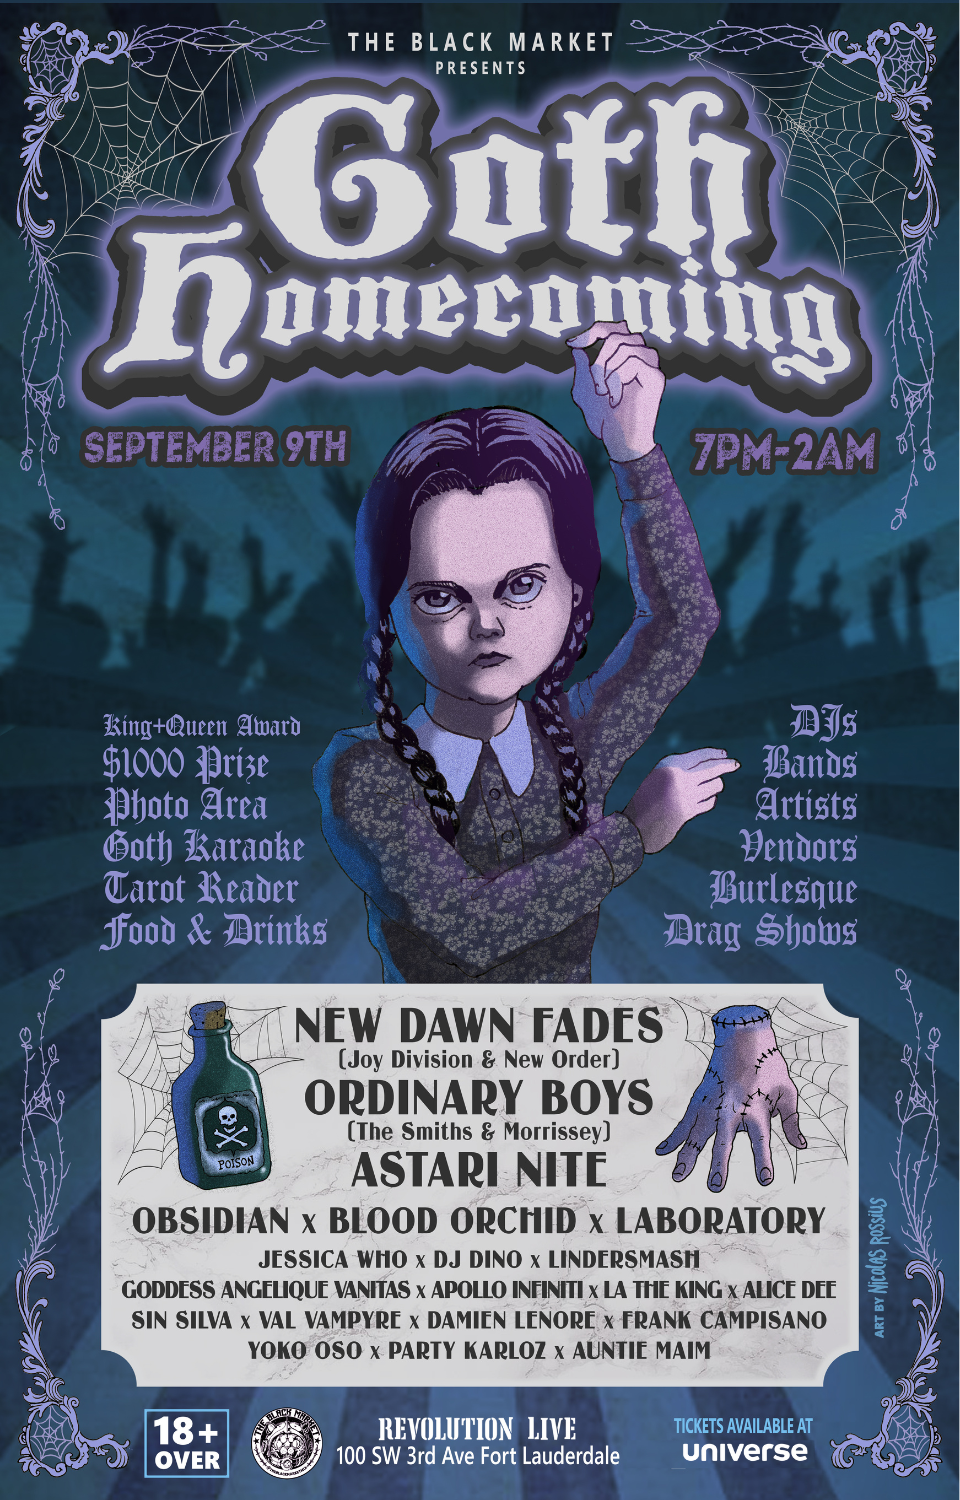 The Black Market Presents Goth Homecoming